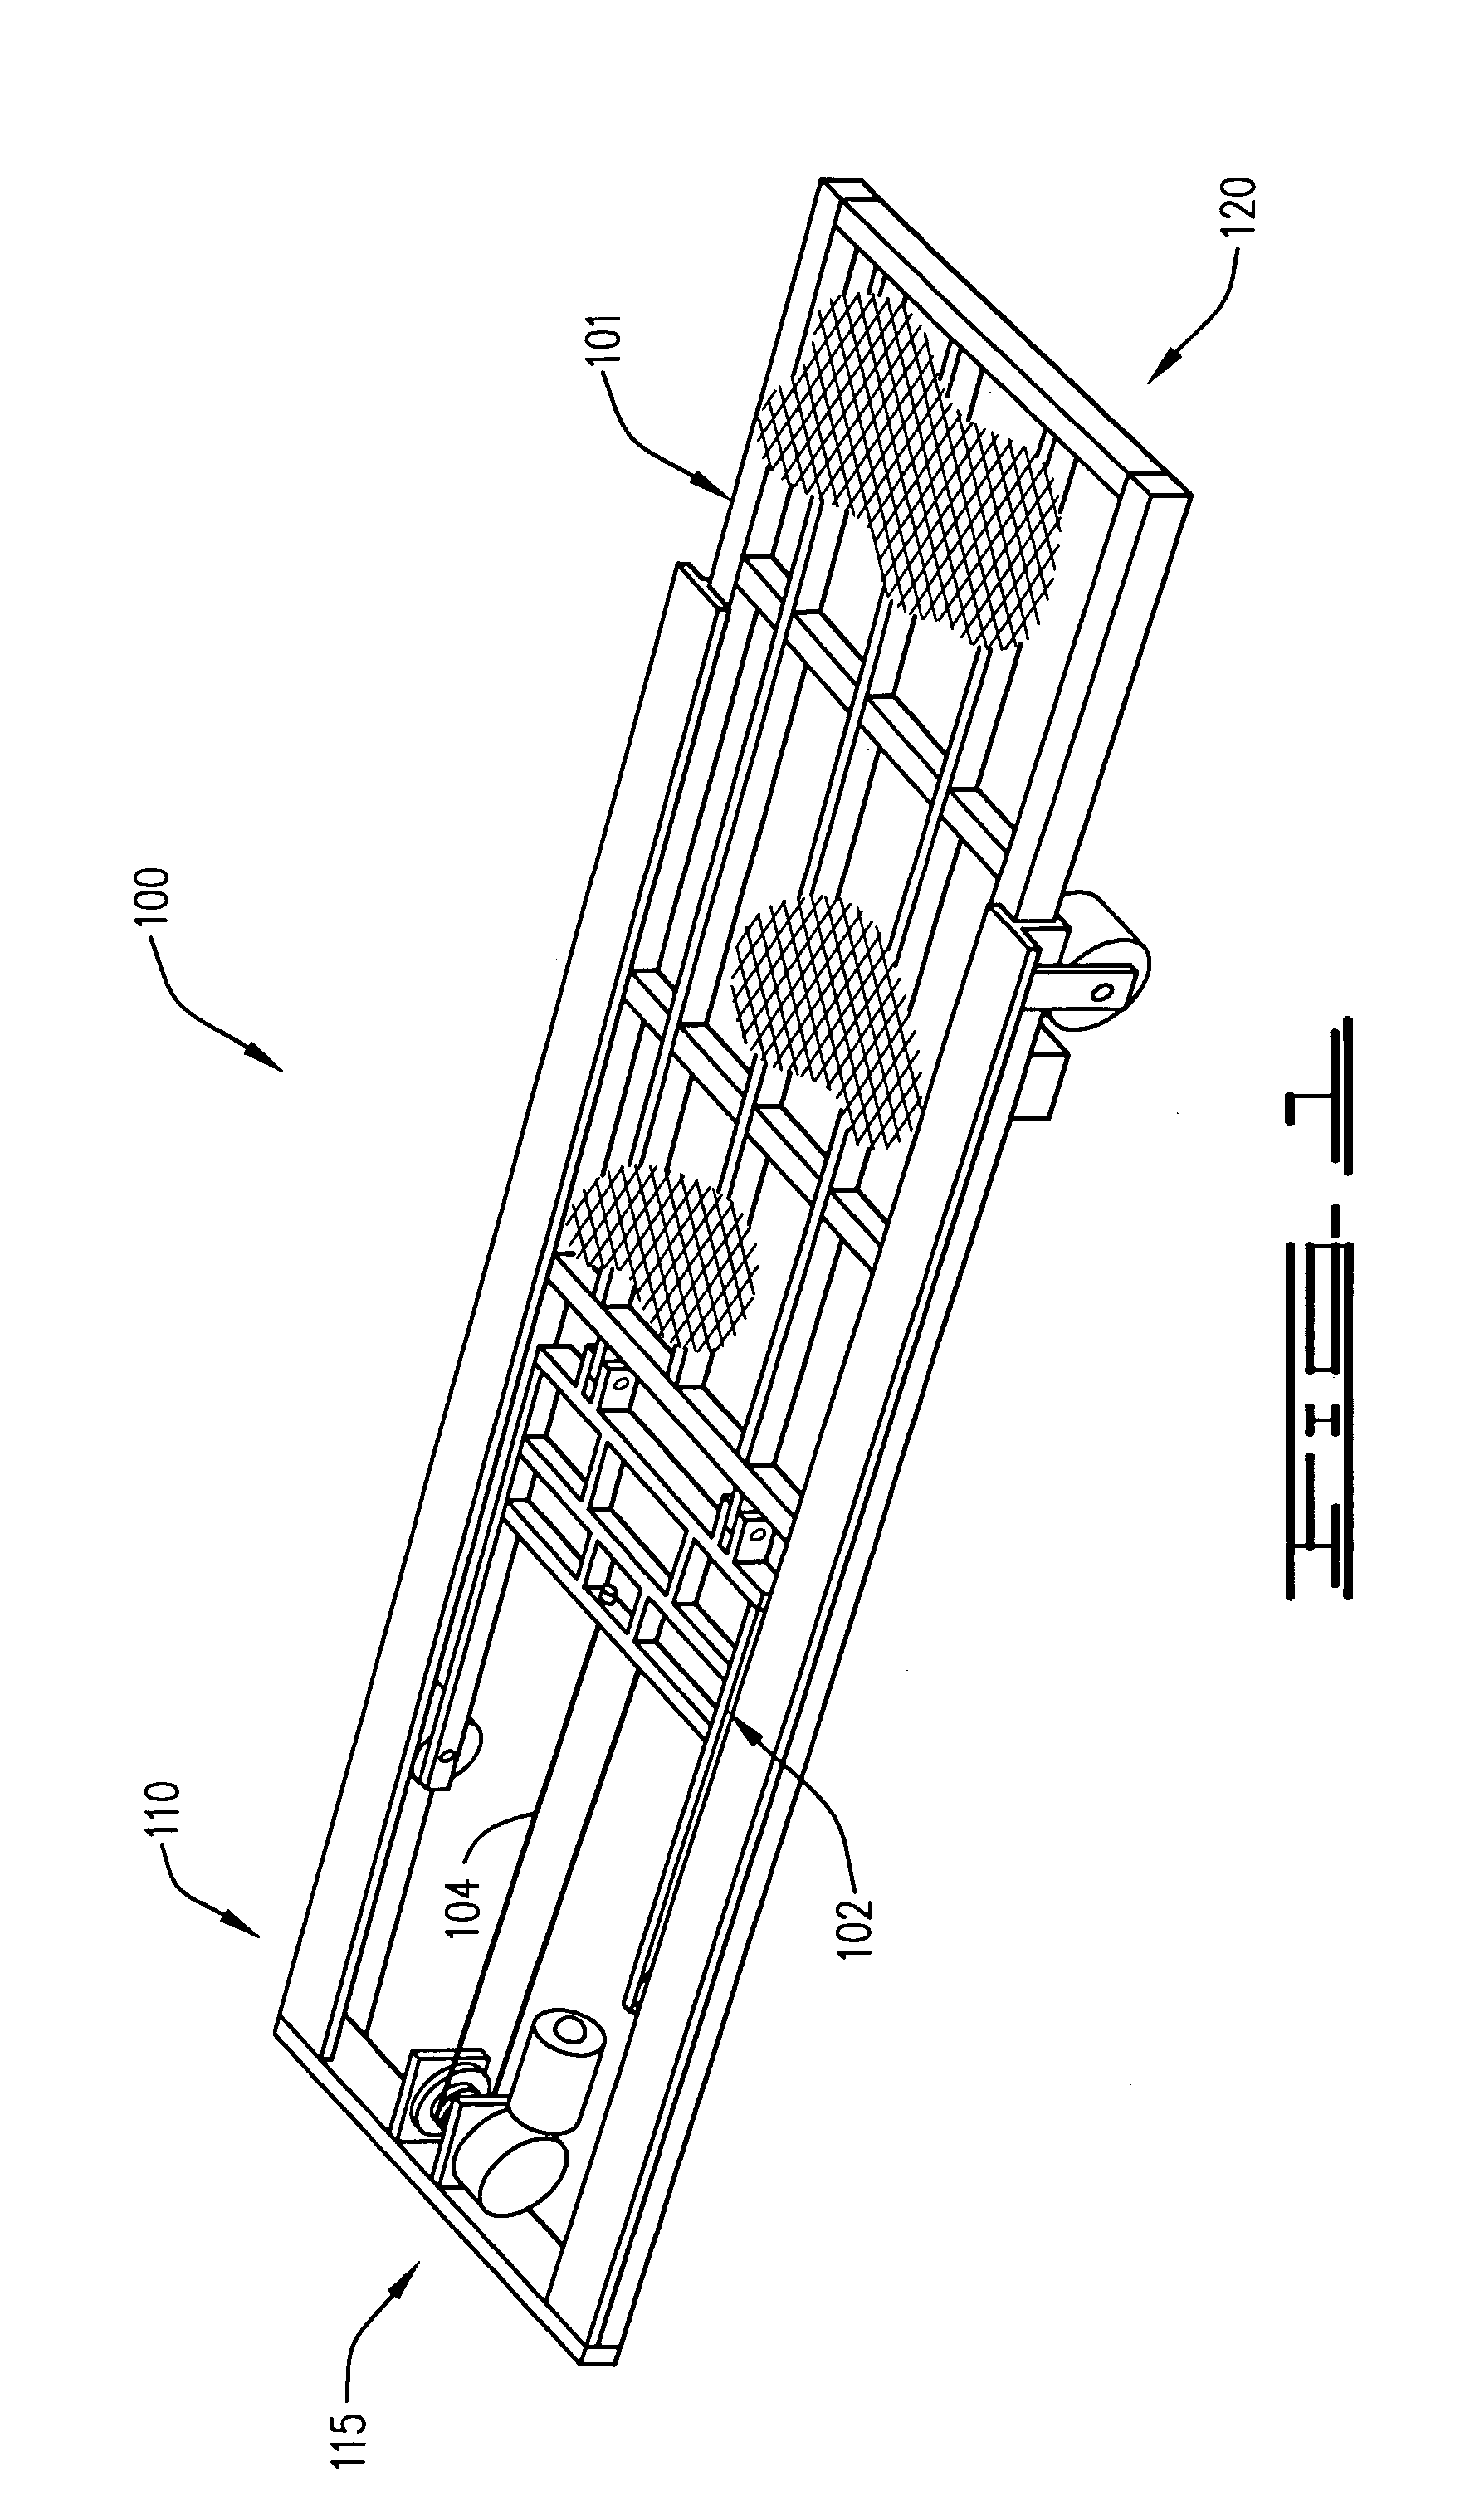 Extendable ramp for boats and vehicles